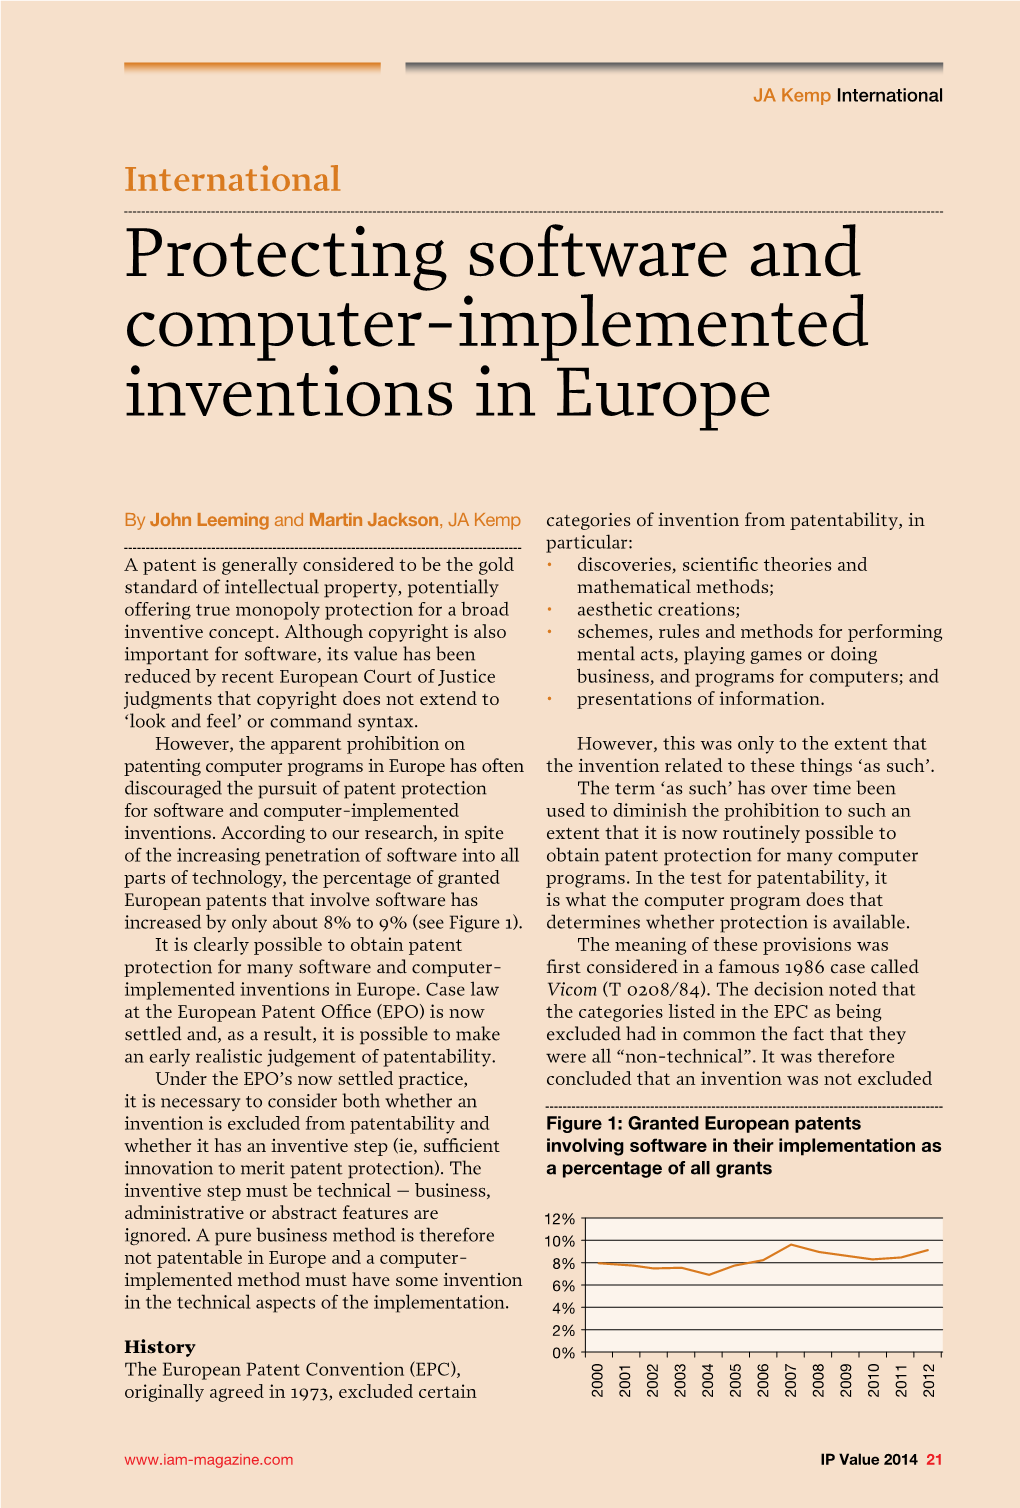 Protecting Software and Computer-Implemented Inventions in Europe